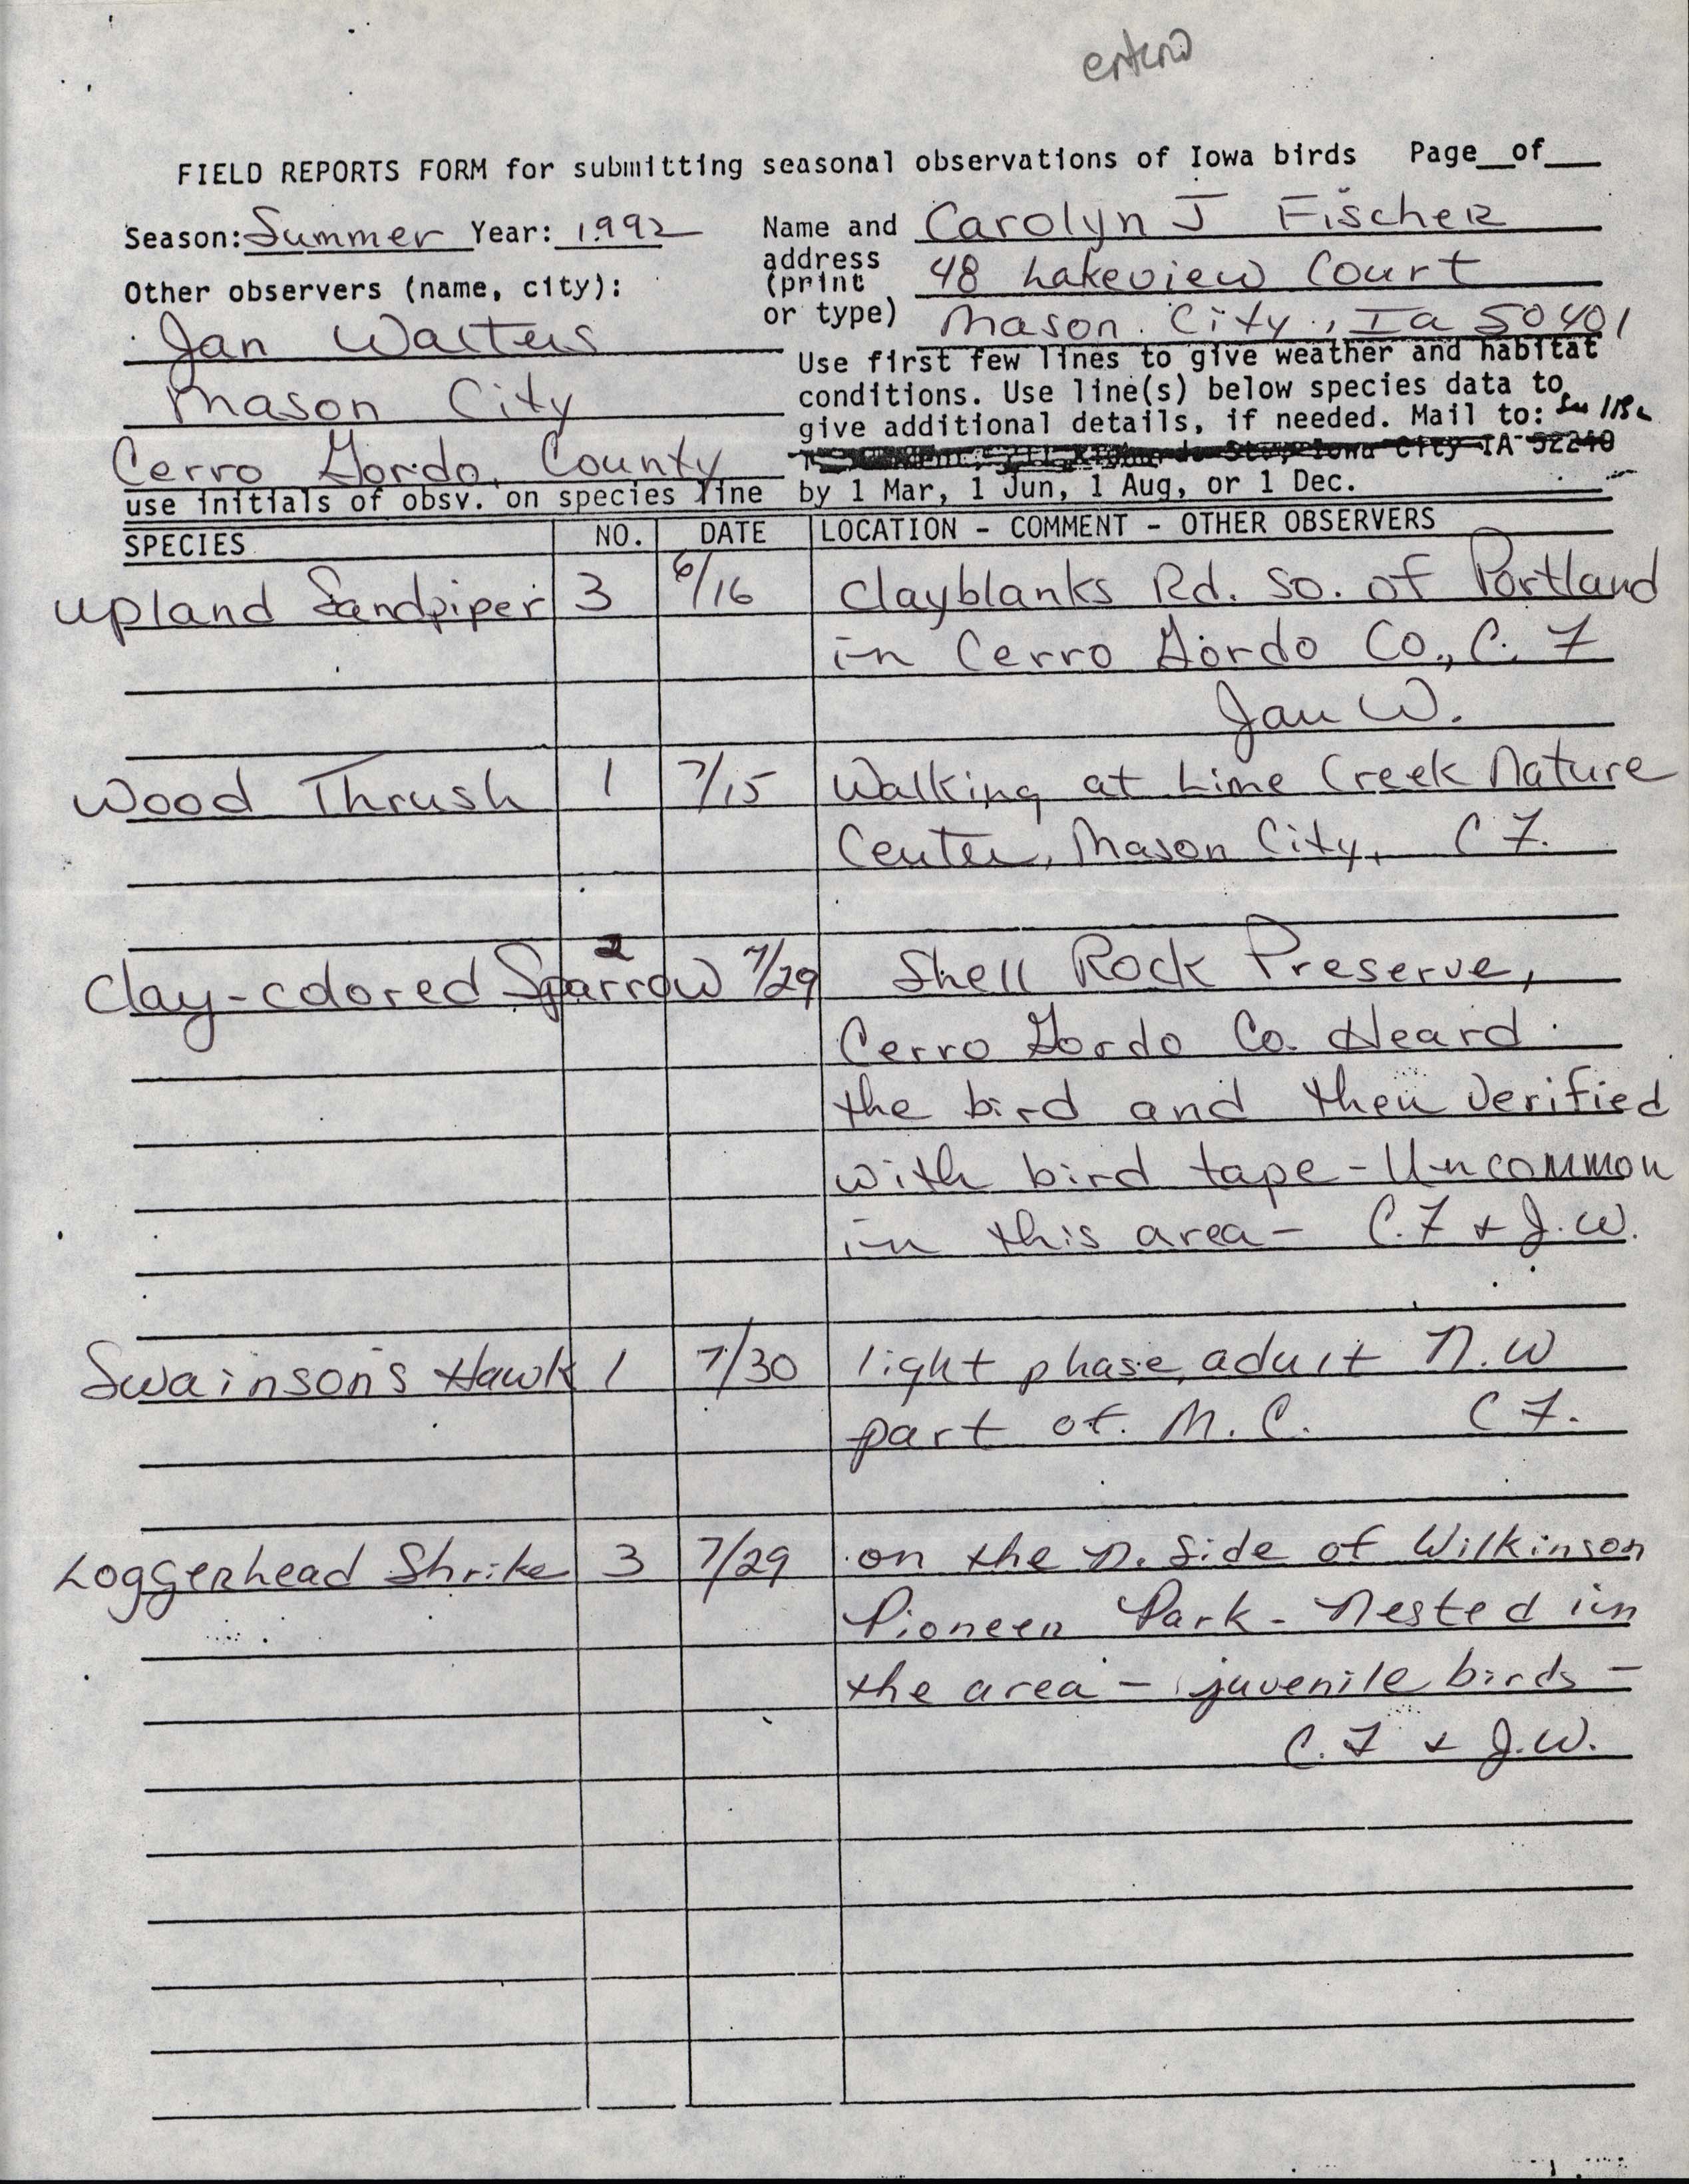 Field reports form for submitting seasonal observations of Iowa birds, Carolyn J. Fischer, summer 1992